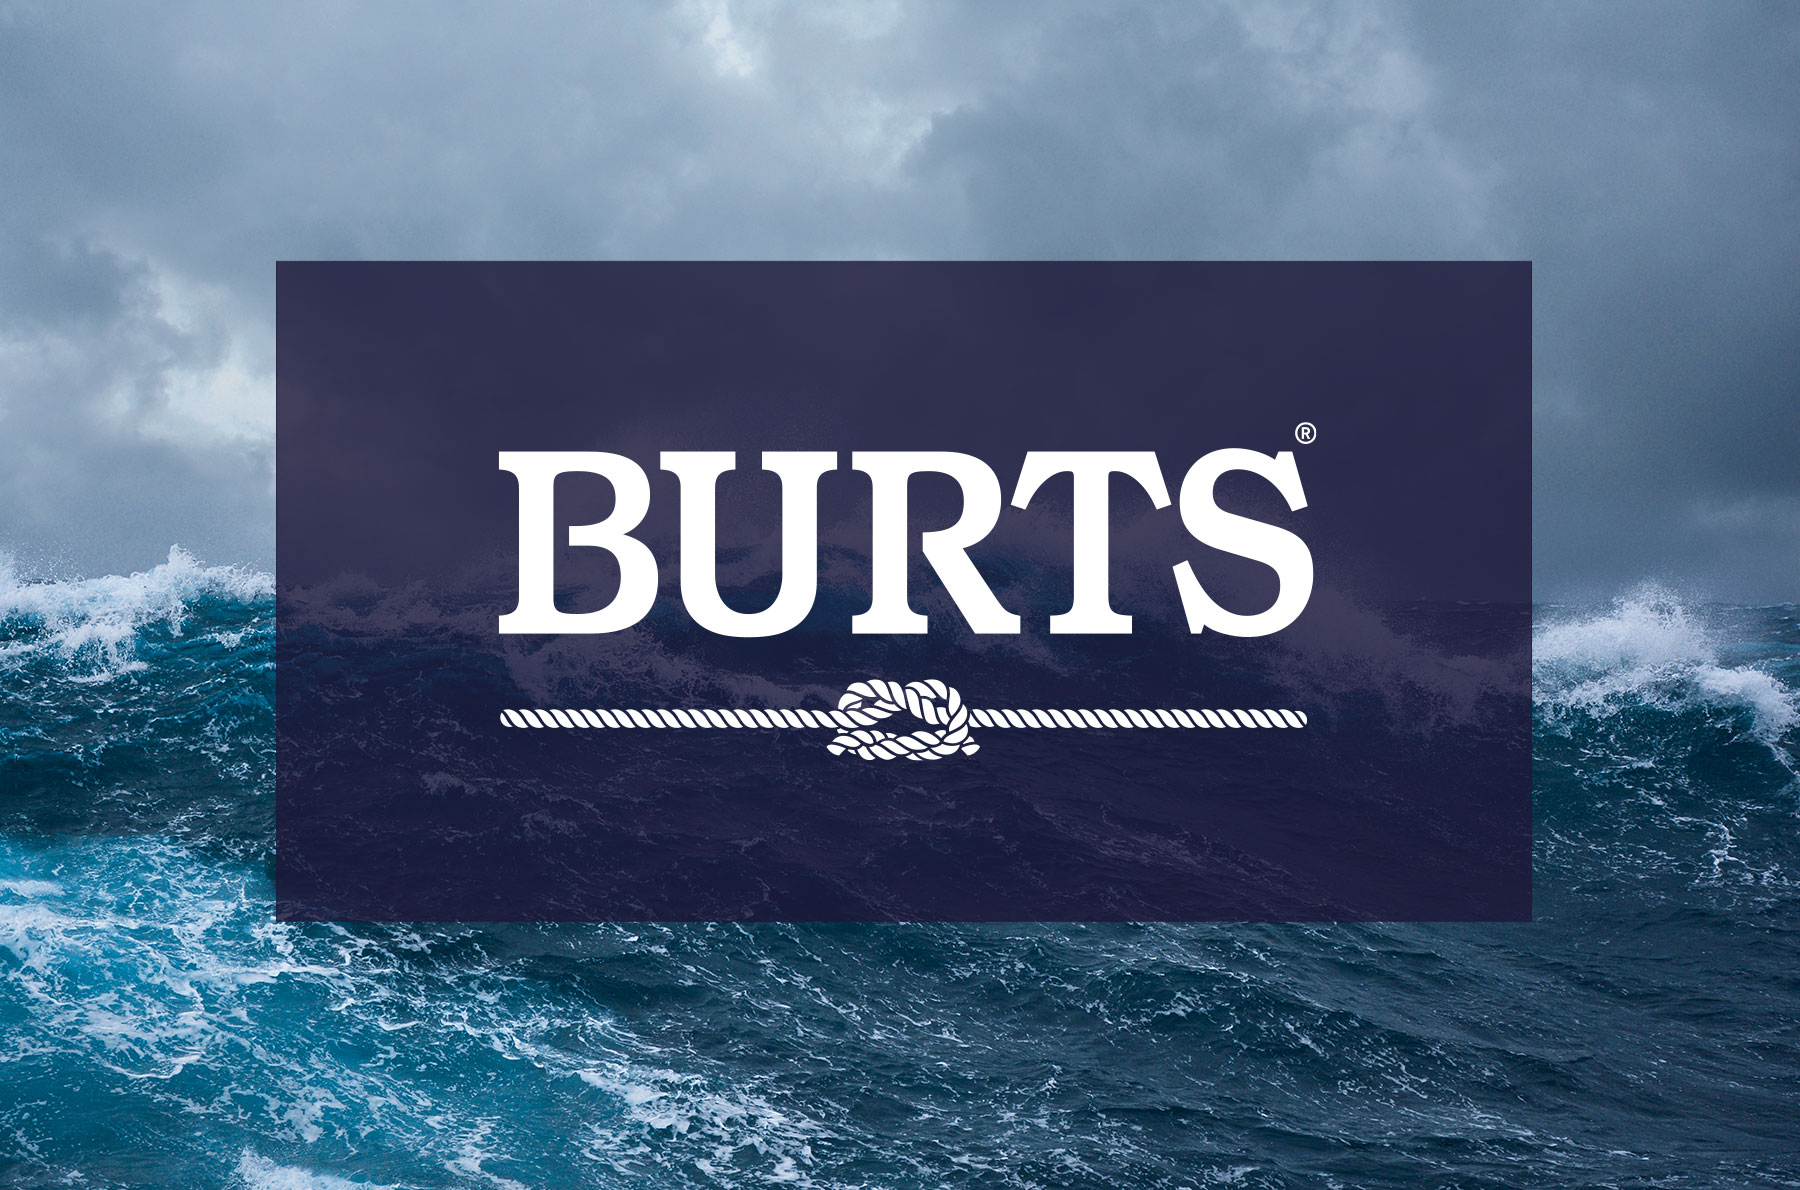 Burts Logo on a blue rectangle on top of a rough sea. Design by Biles Hendry